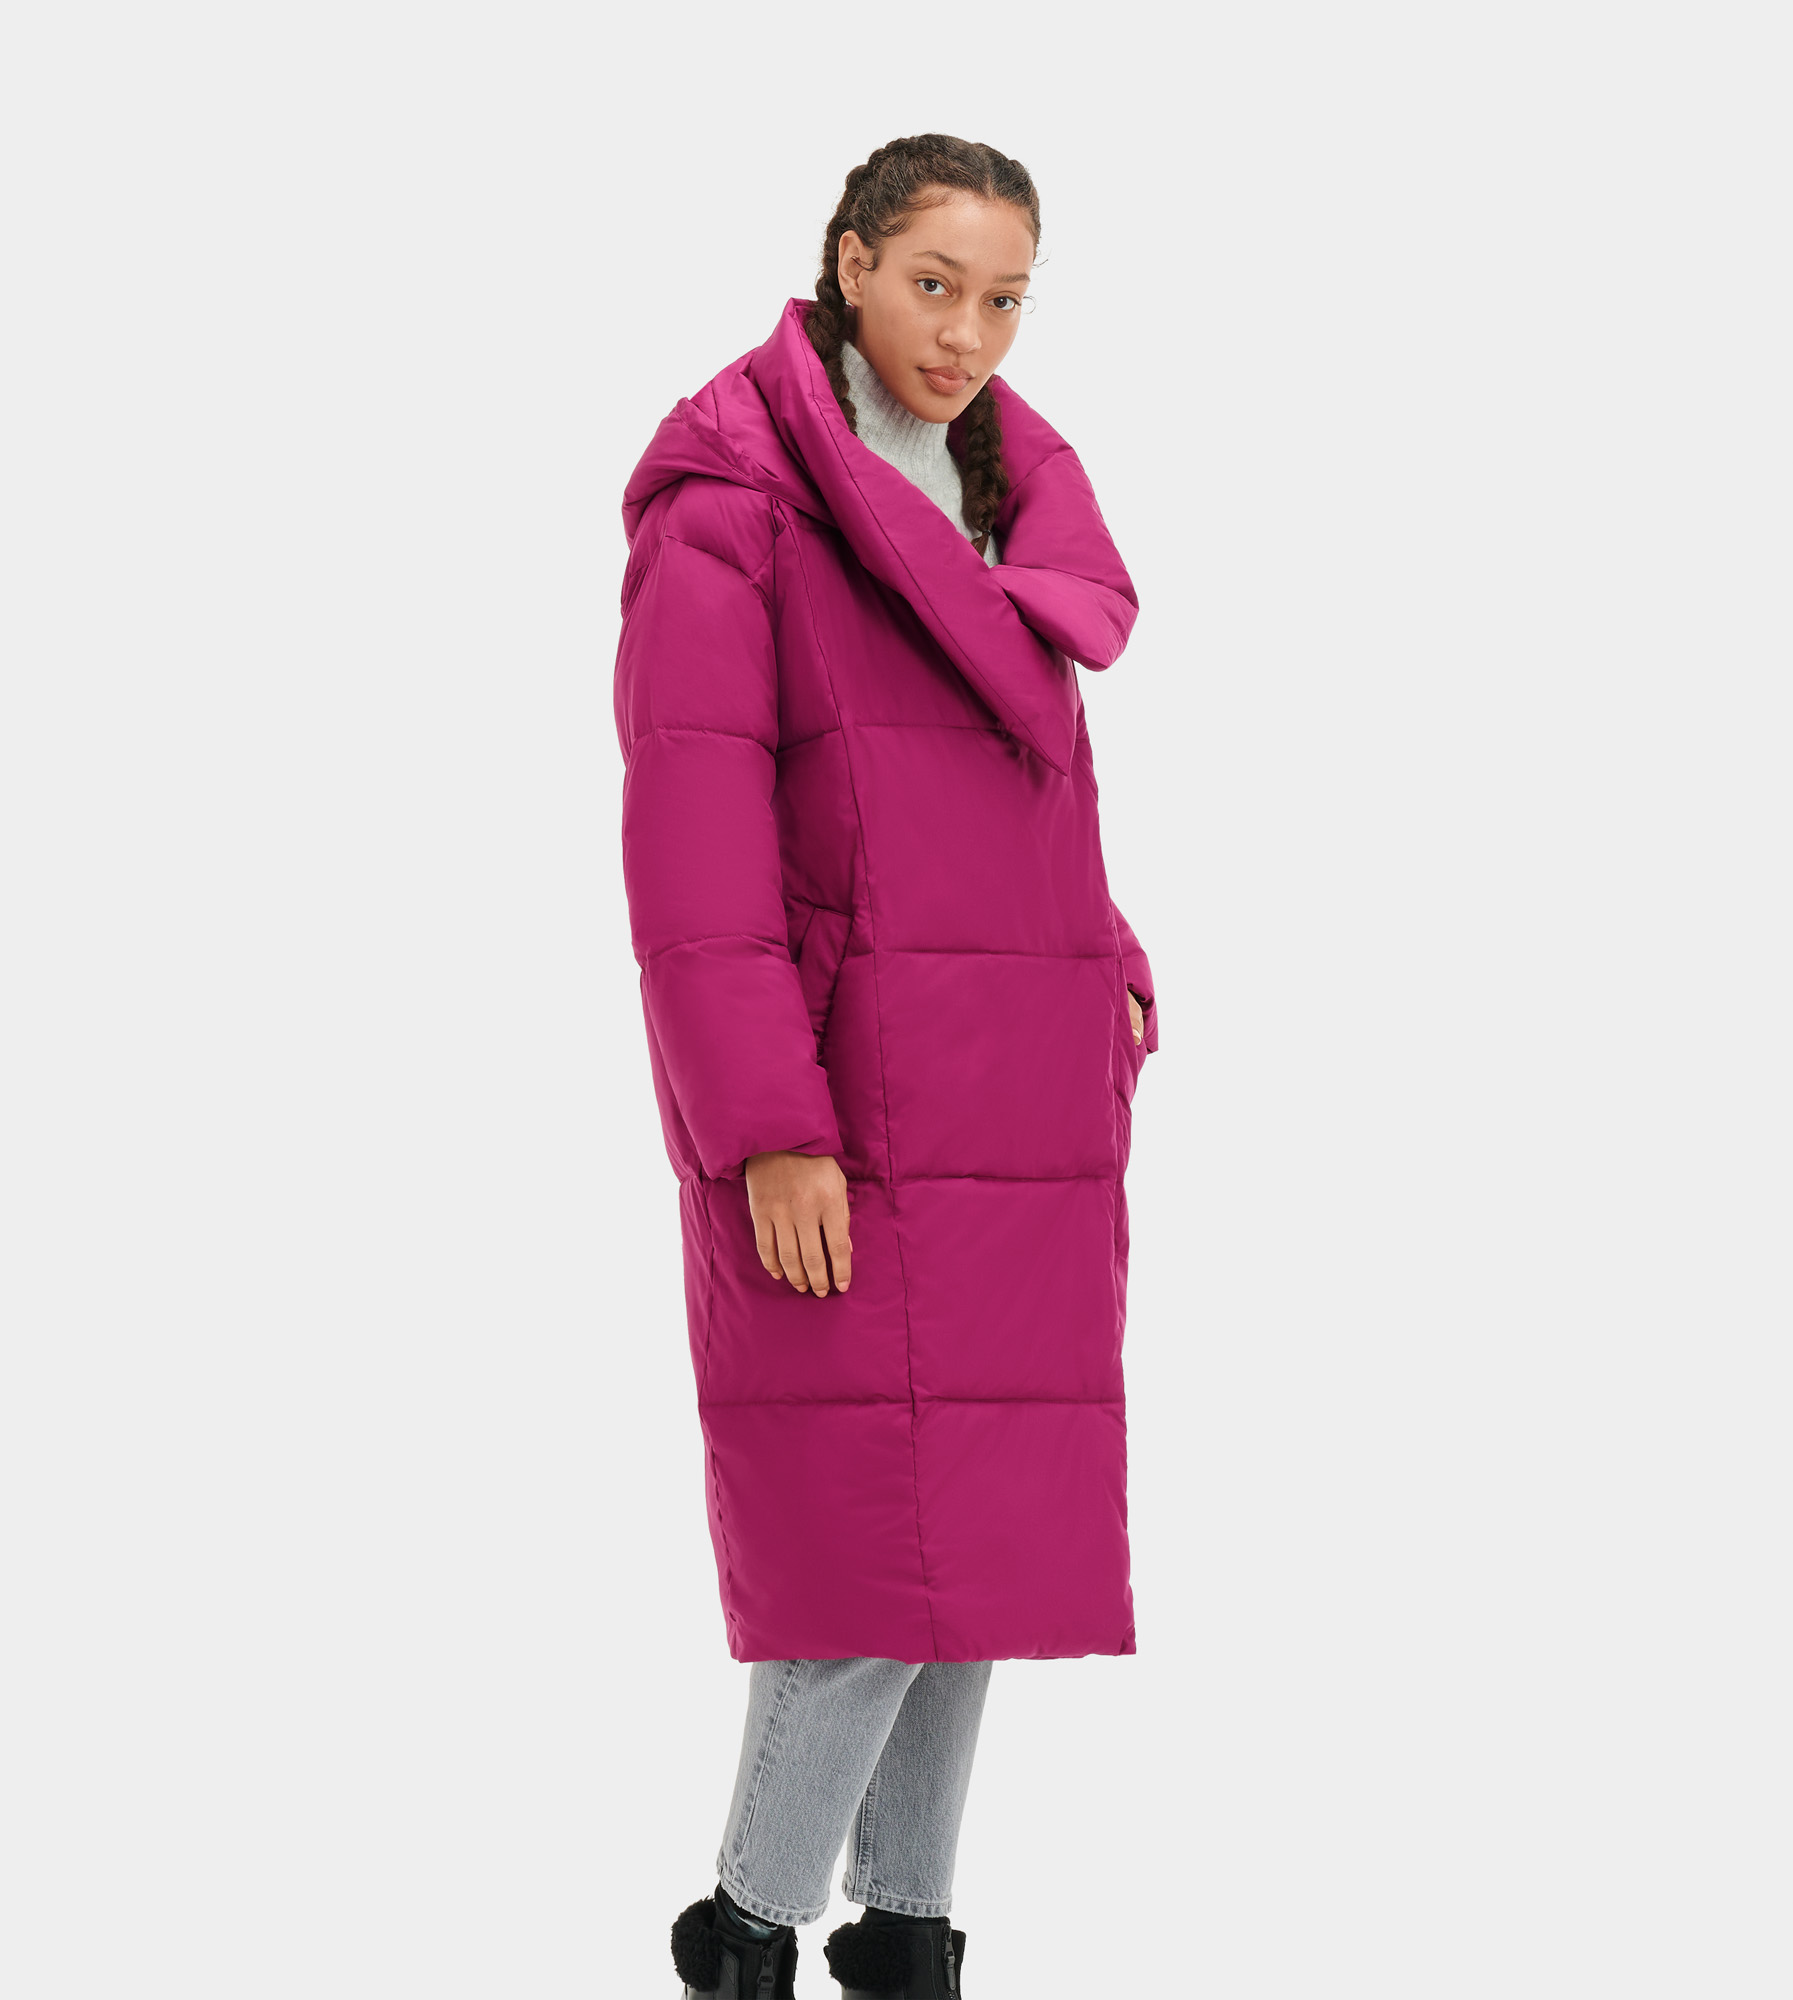 UGG Catherina Puffer Vestes pour Femme in Wild Violet, Taille L, Polyester